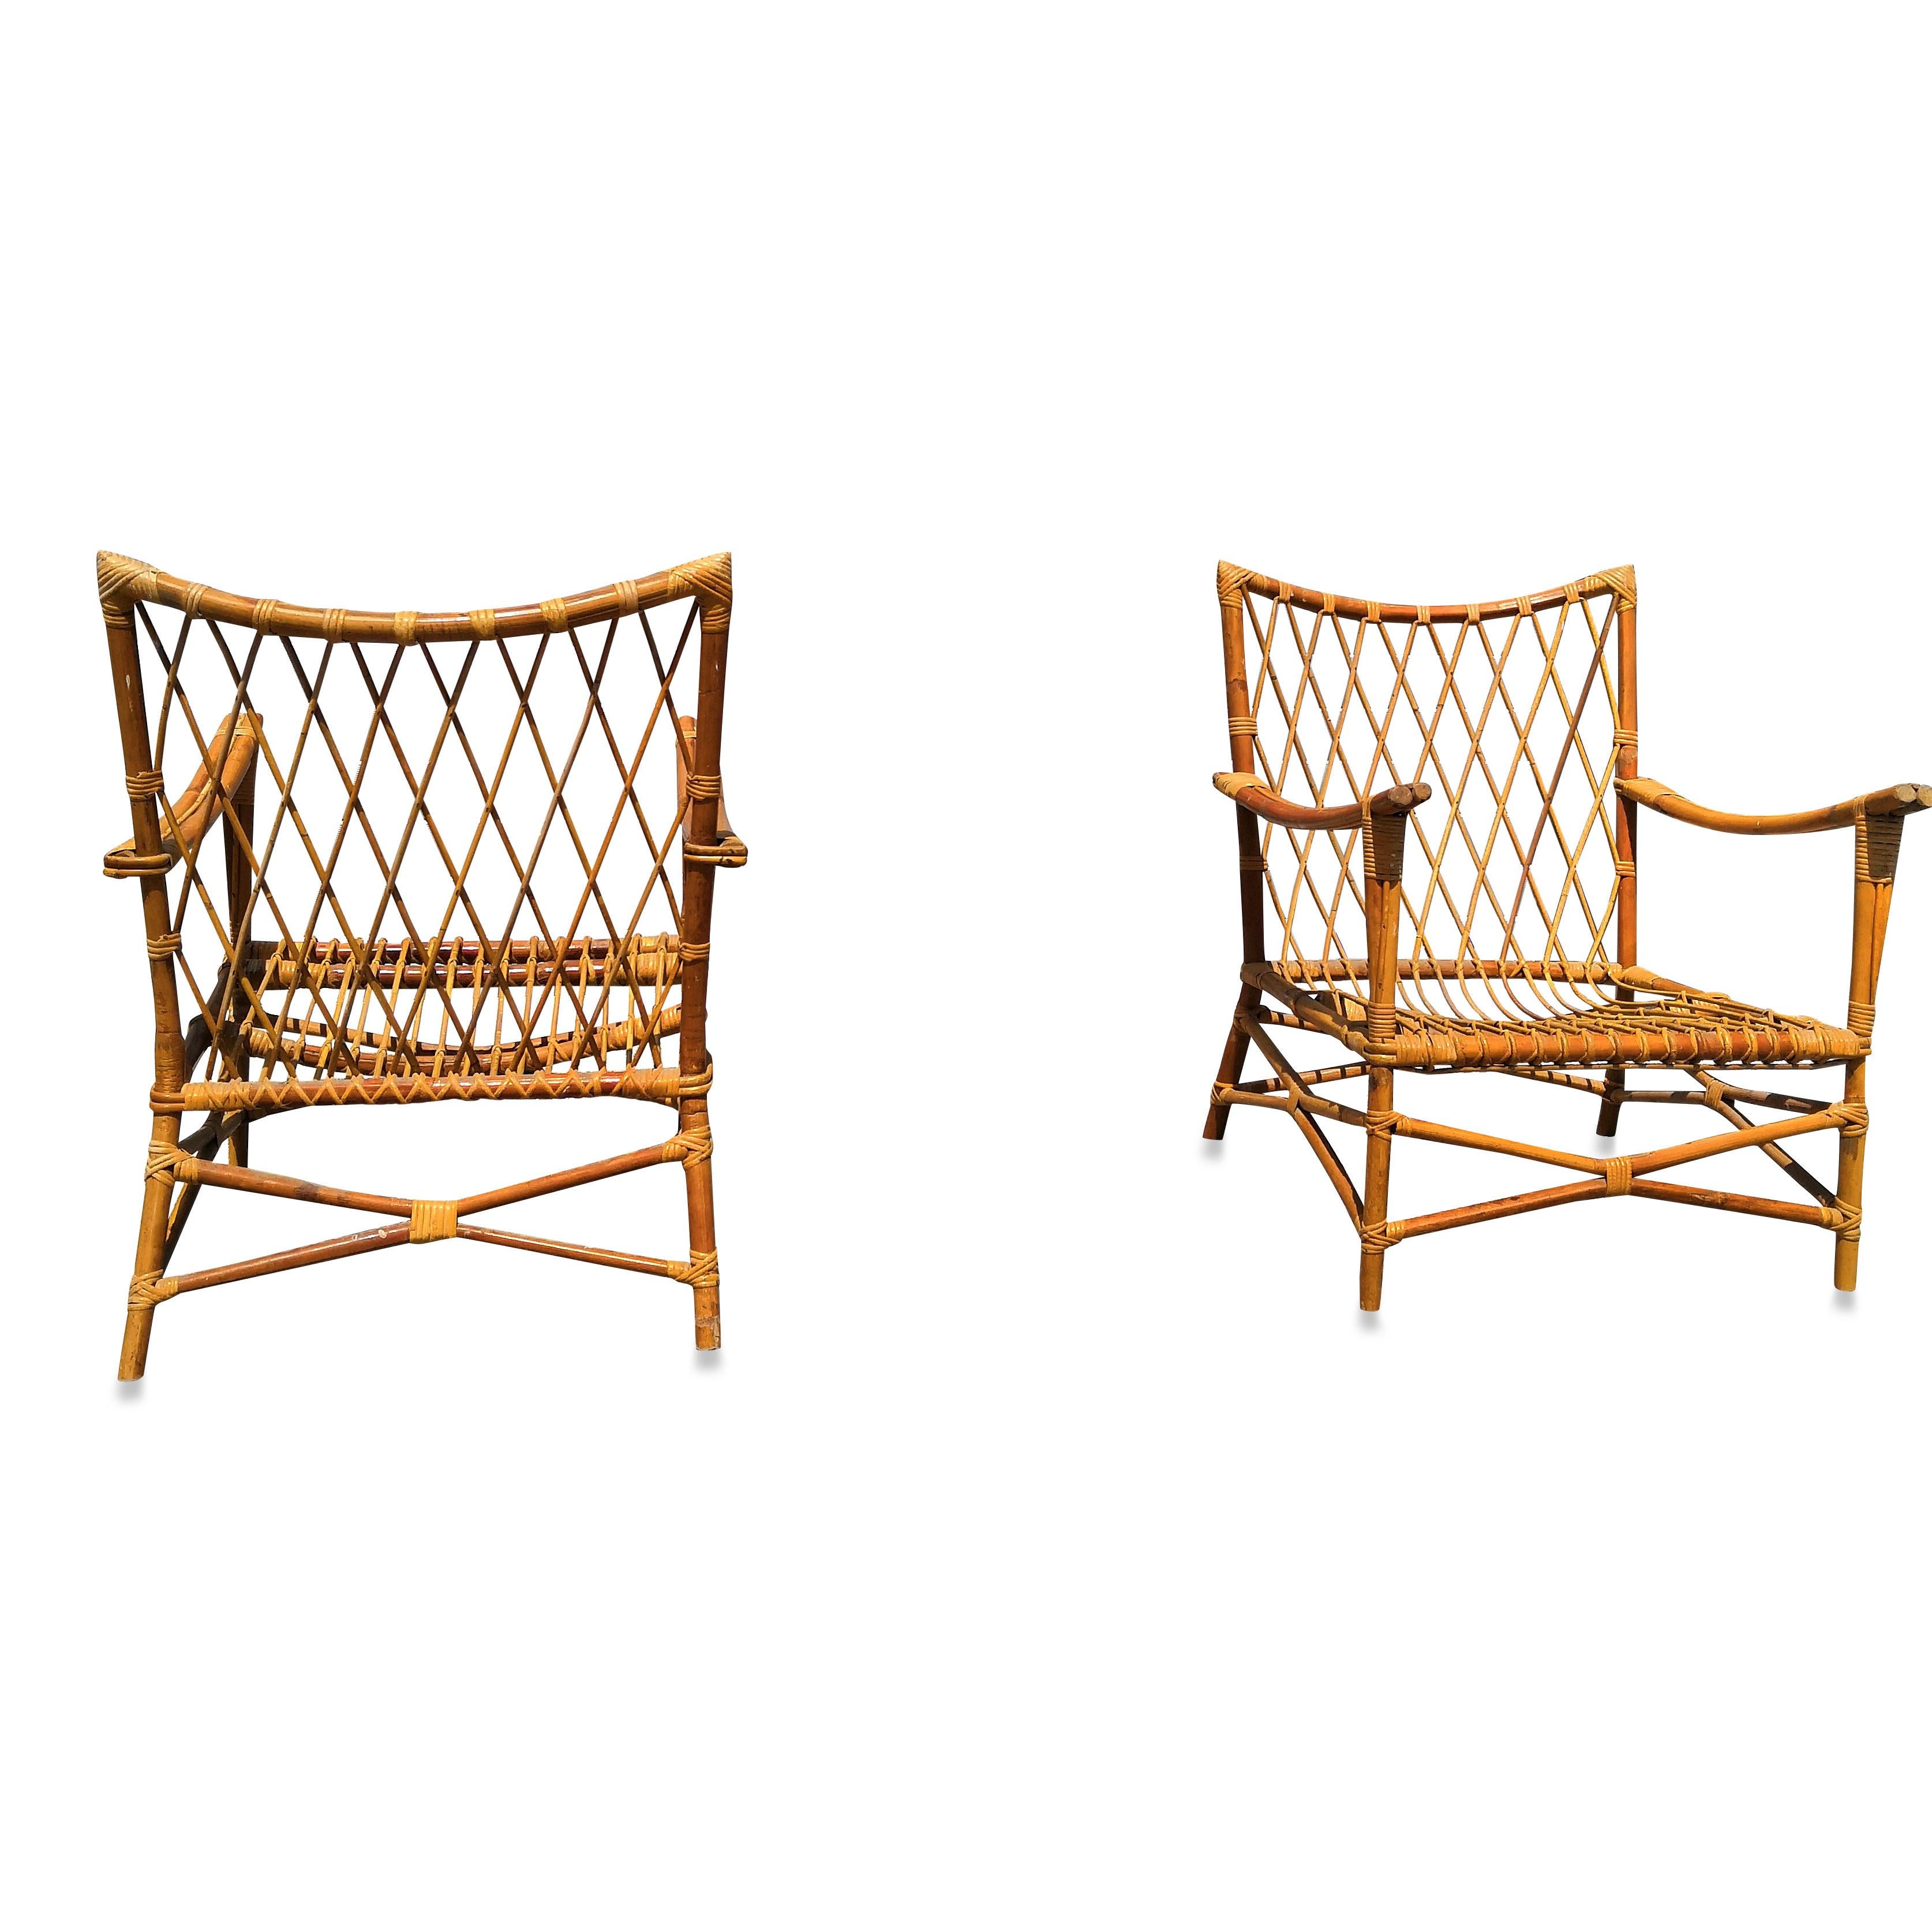 Pair of Bamboo and Rattan Armchairs, France, 1960s (Wolle)